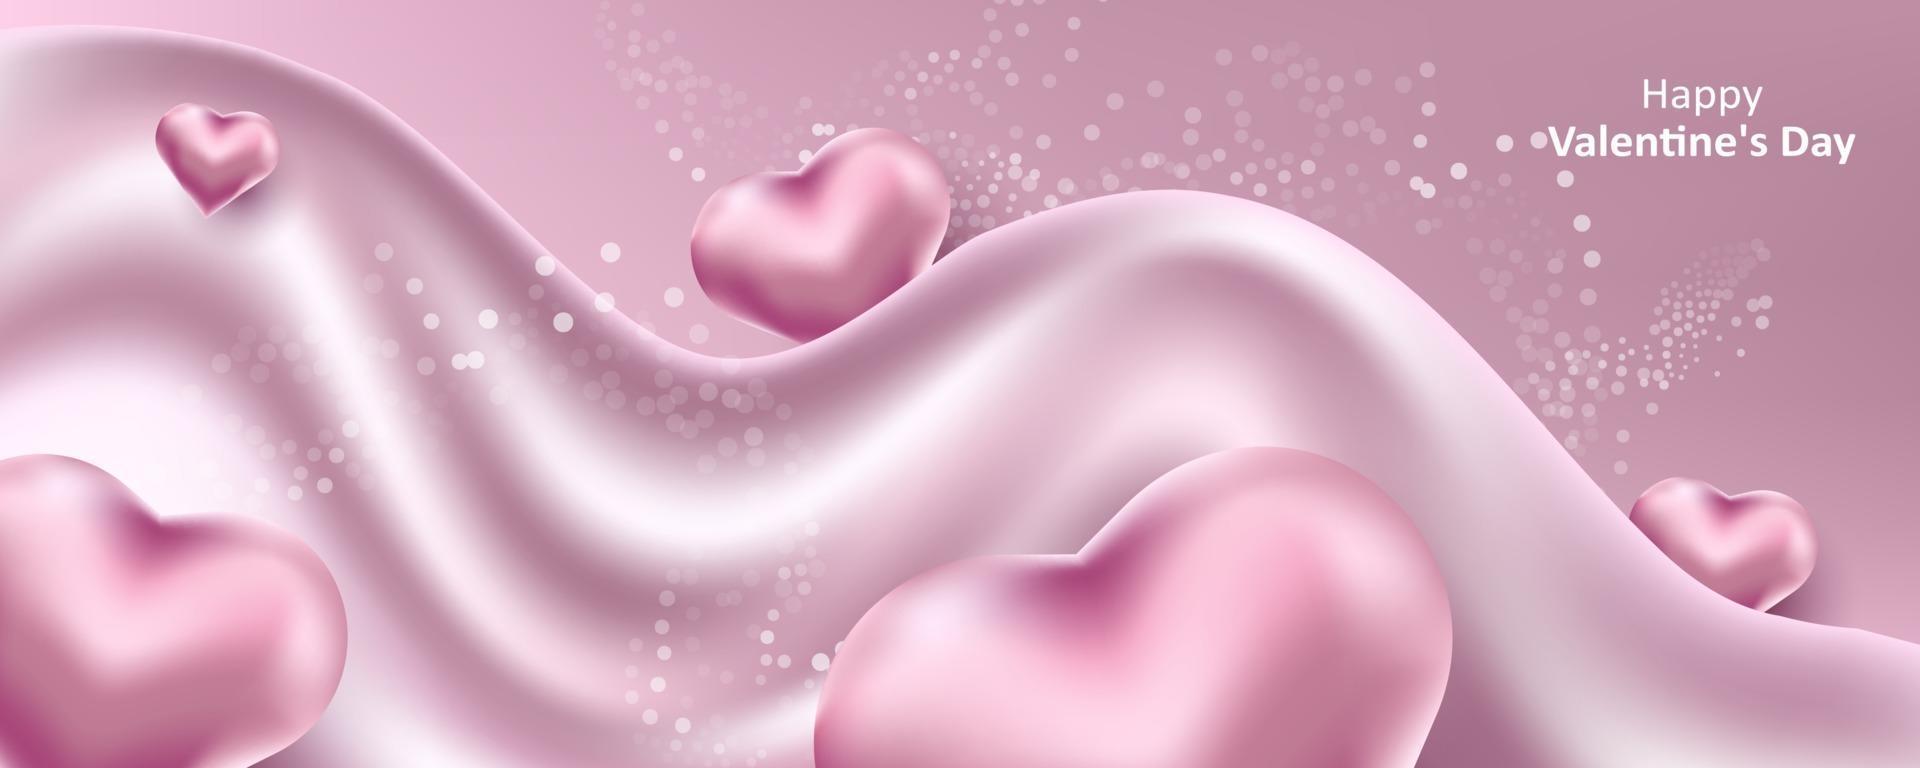 Valentine's Day. A delicate cute pink background with realistic 3D hearts and fluid. Vector illustration for banner, card. Wedding invitation, Mother's Day